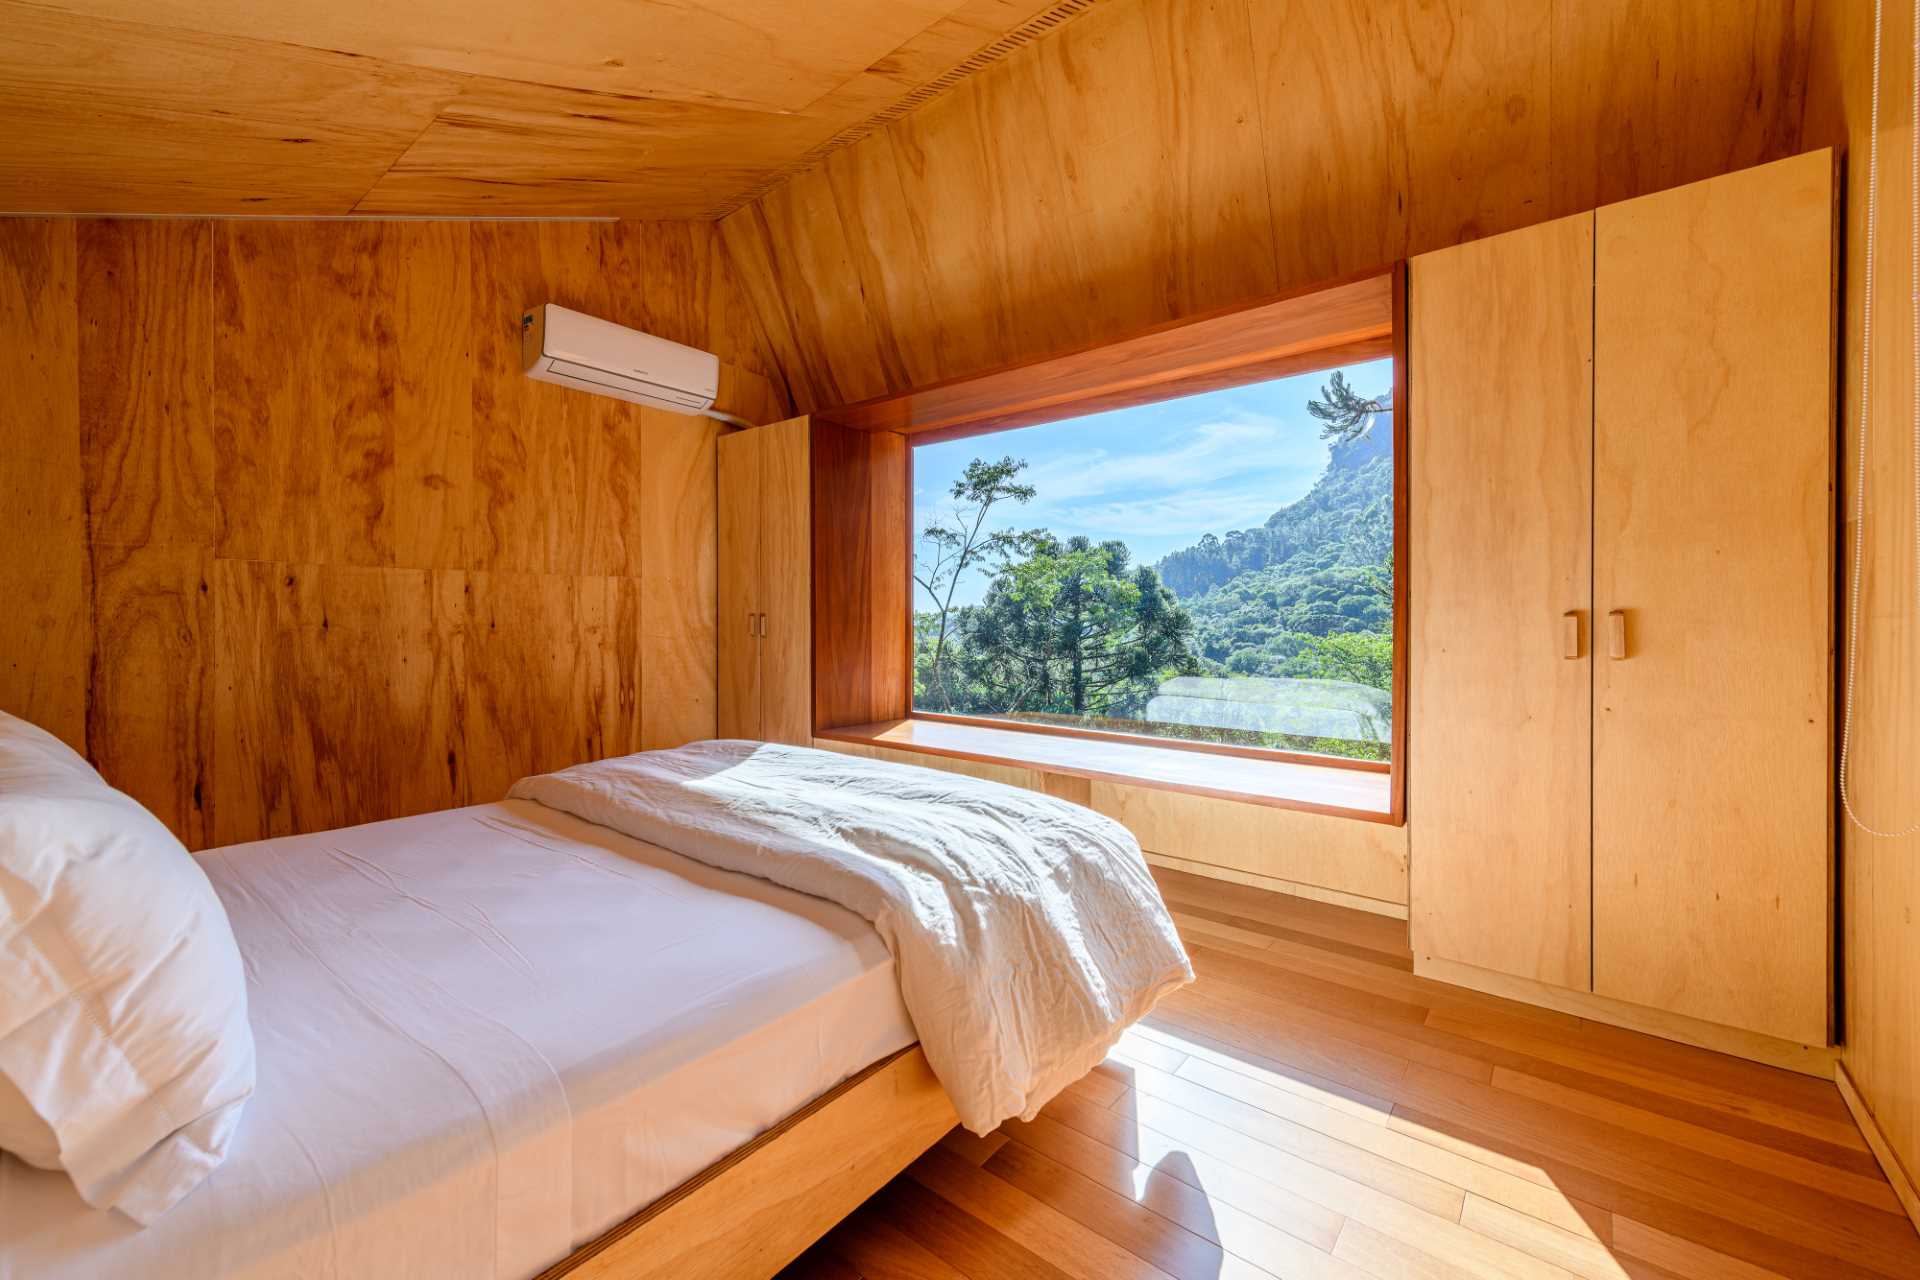 The bedroom of a modern tree house includes two closets, a large picture window, and a window bench.